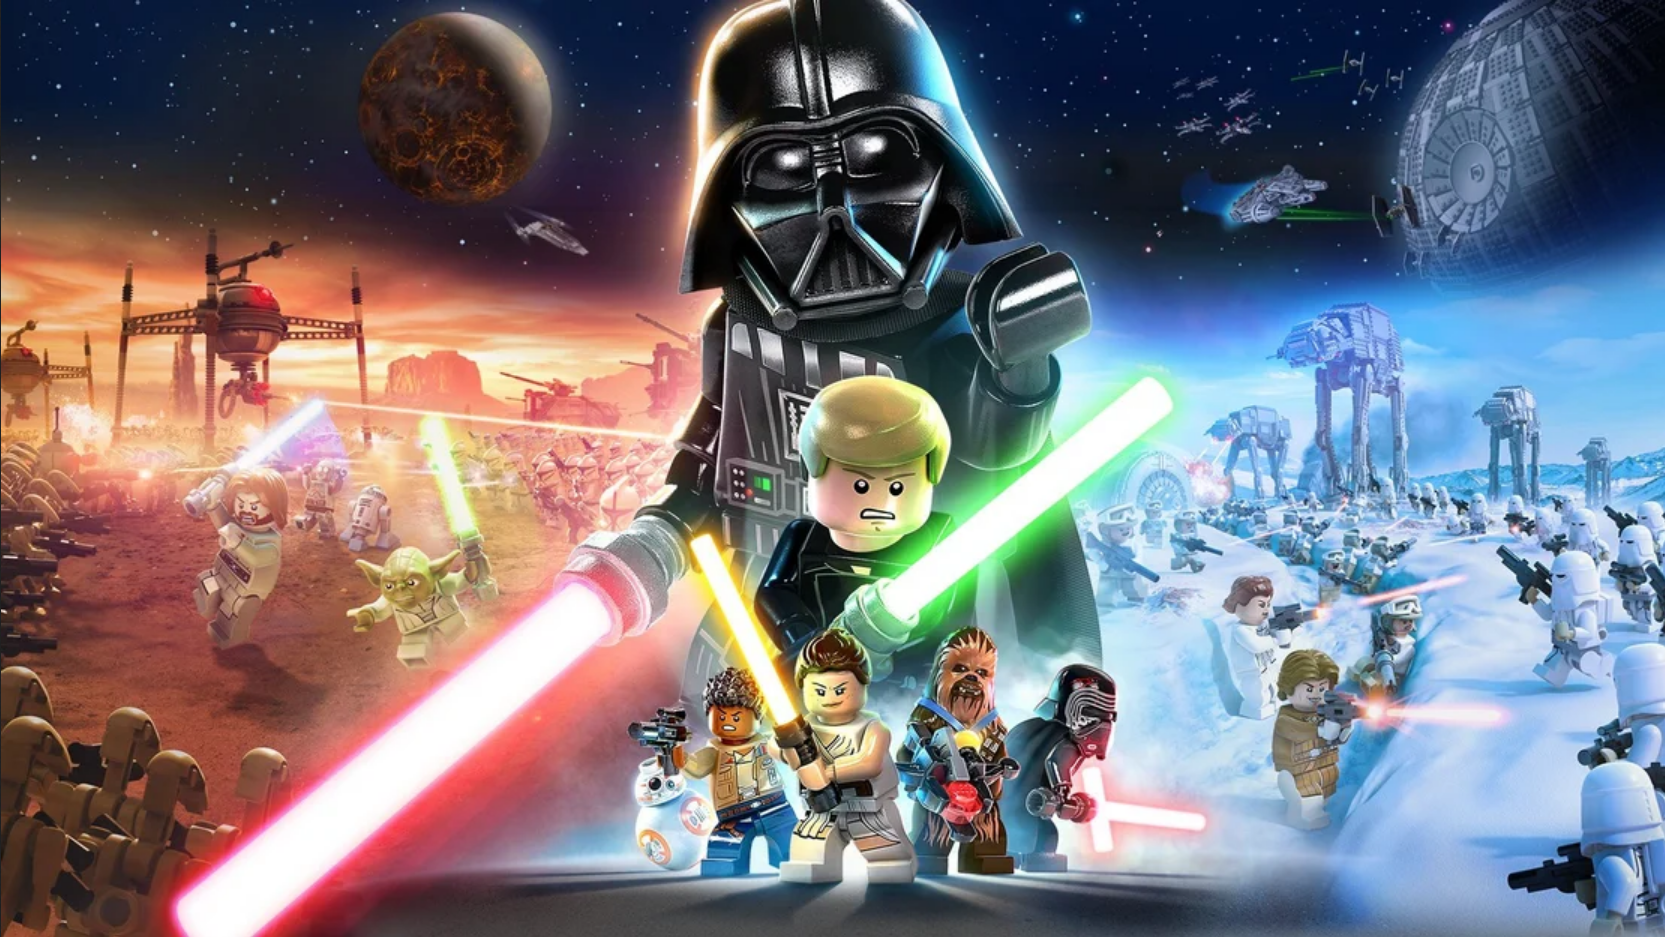 LEGO Star Wars: The Skywalker Saga has sold 3.2 million copies in two weeks - a record among LEGO games